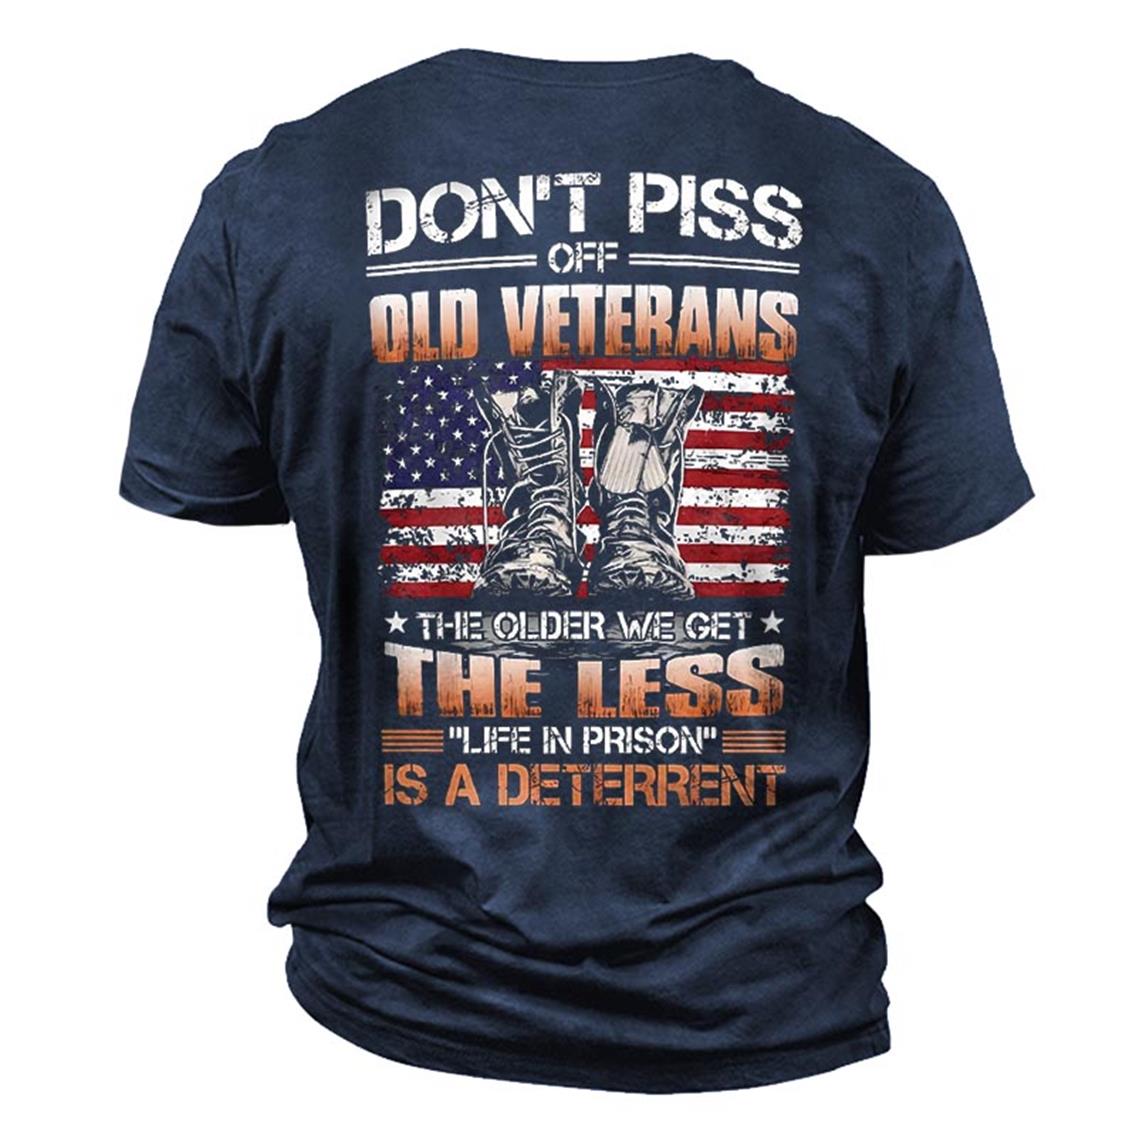 Men's Don't Piss Off Chic Old Veterans The Older We Get The Less Cotton T-shirt